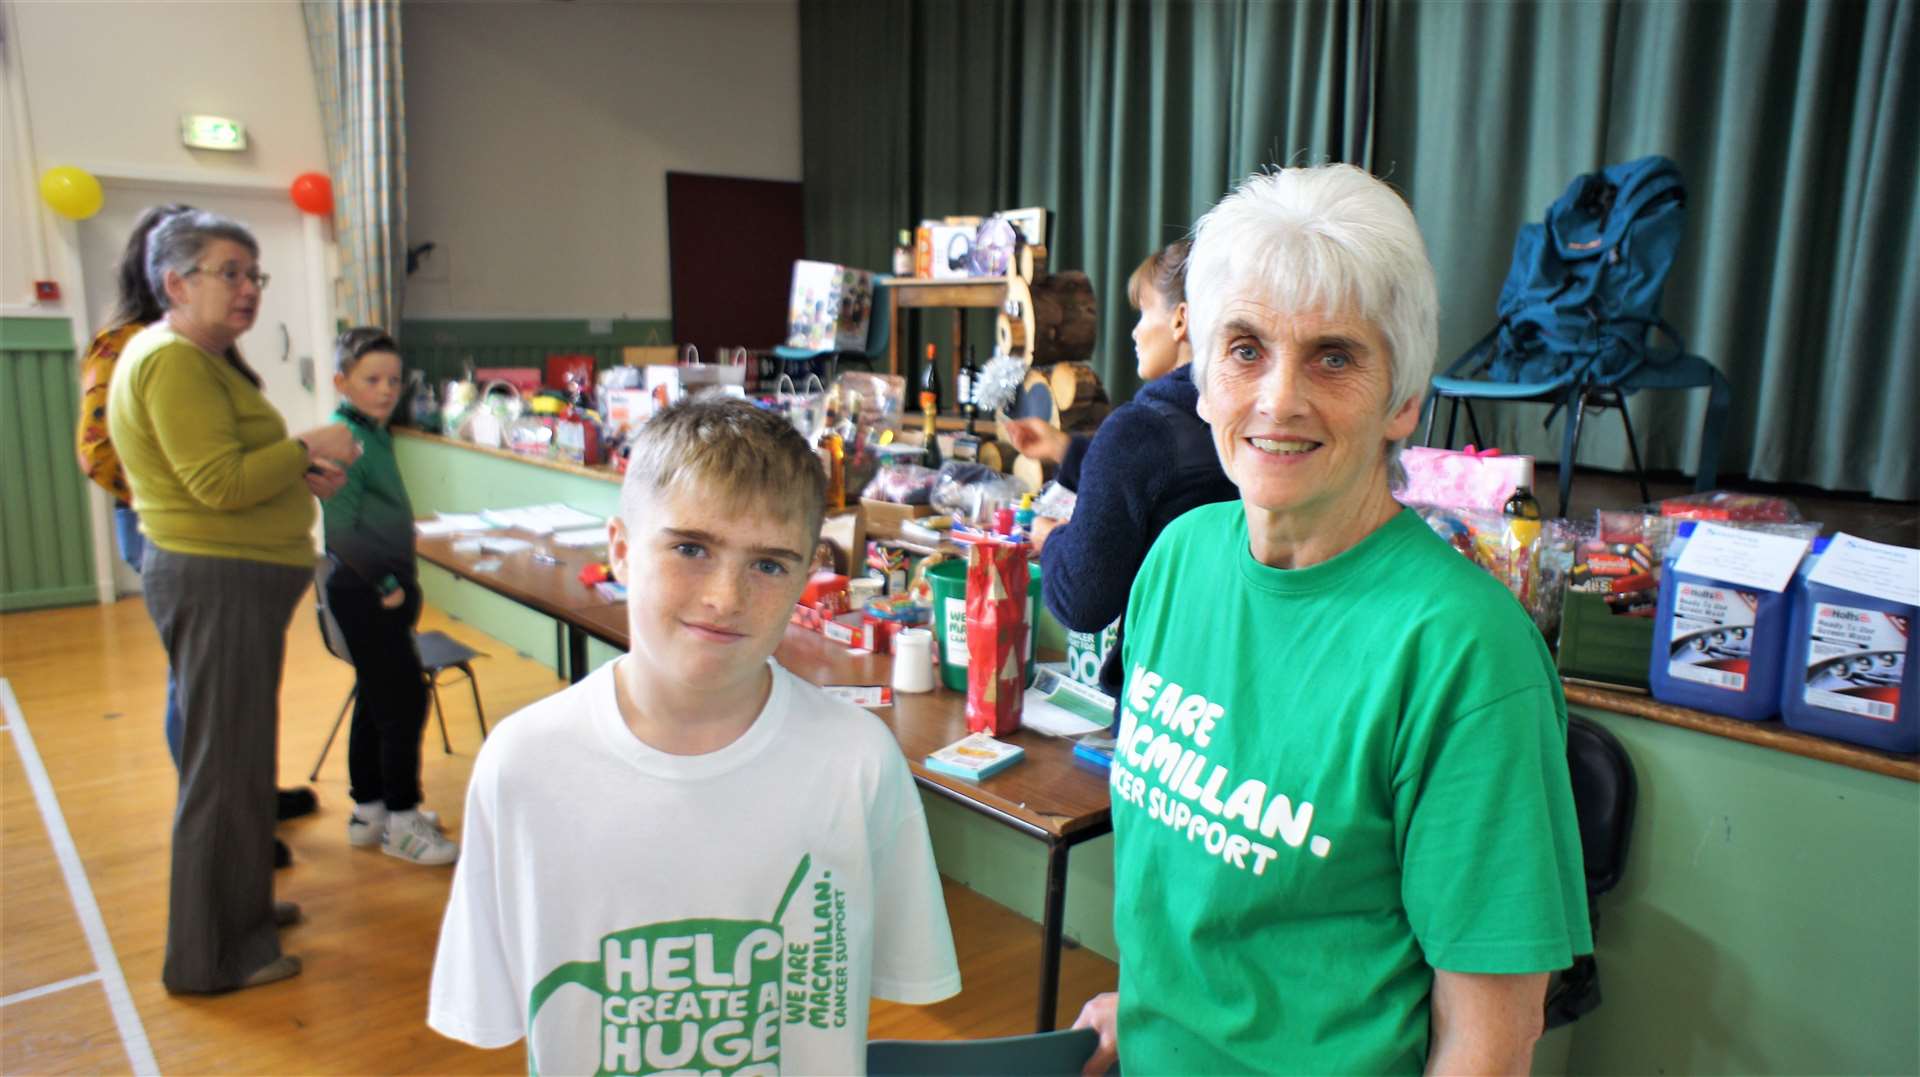 Dianne Mackay with her grandson Olly at the Macmillan coffee morning event in Watten Village Hall. Picture: DGS